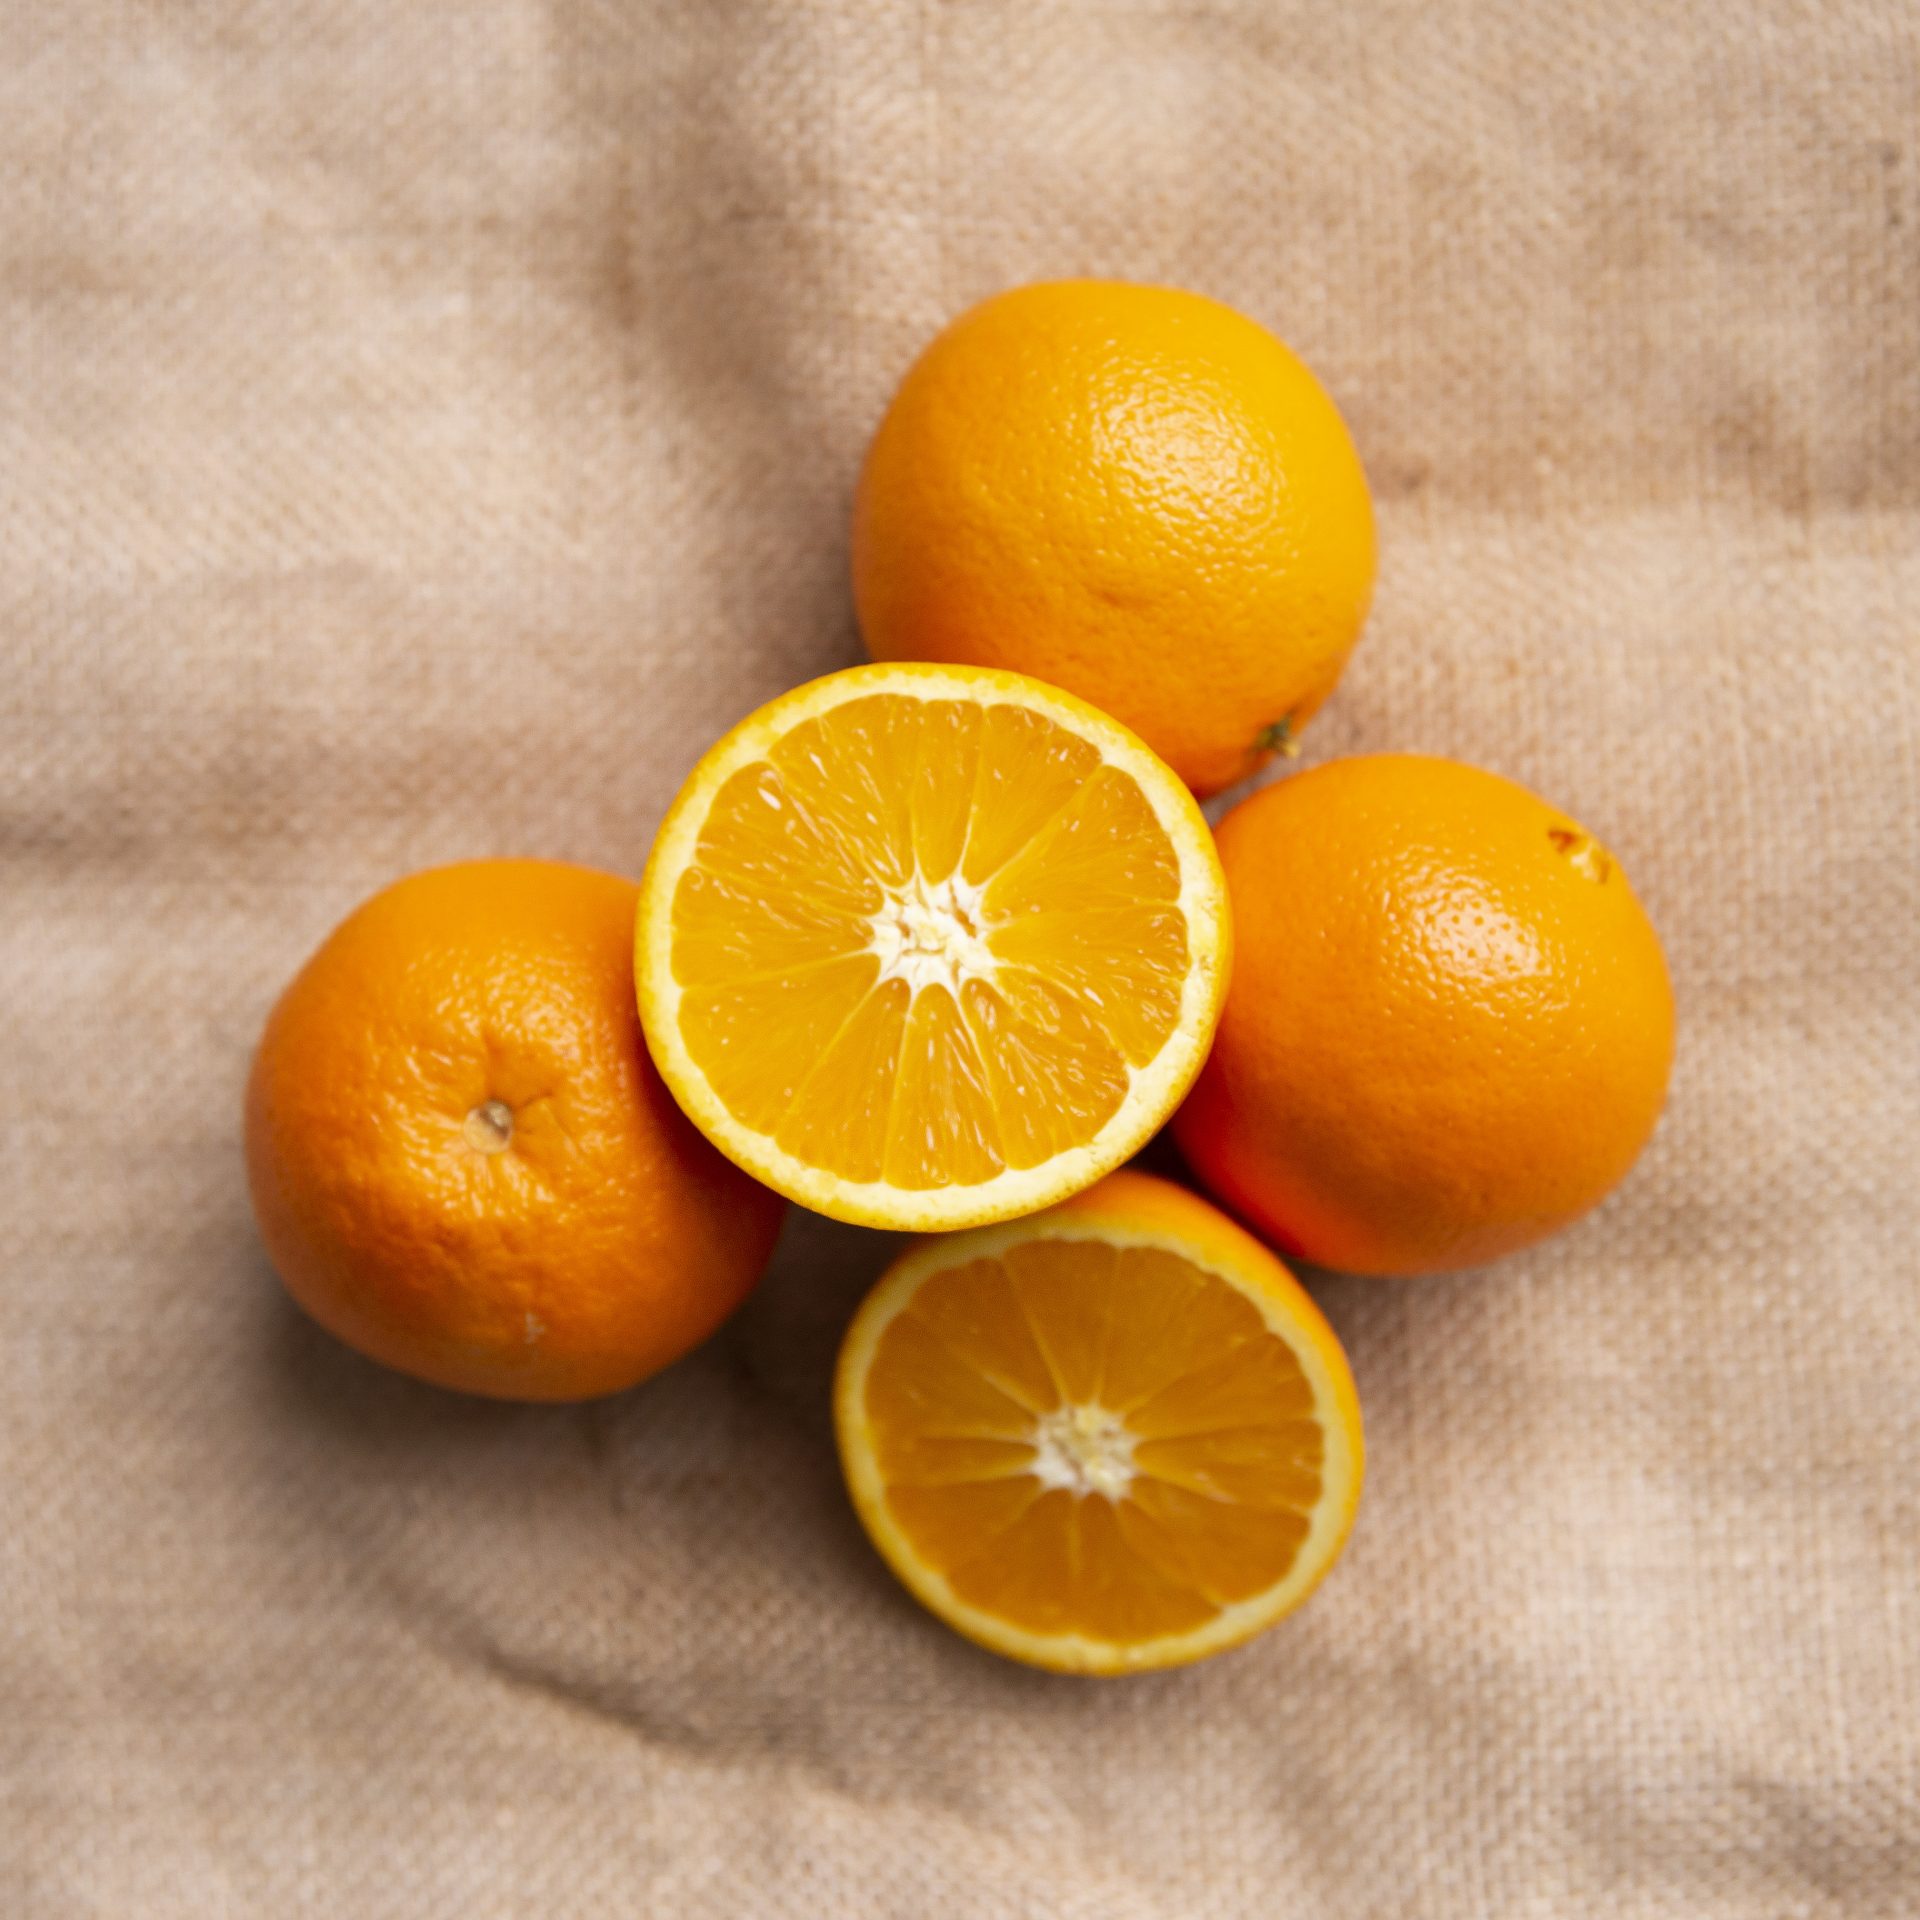 What Is In Oranges To Help Developing Baby?